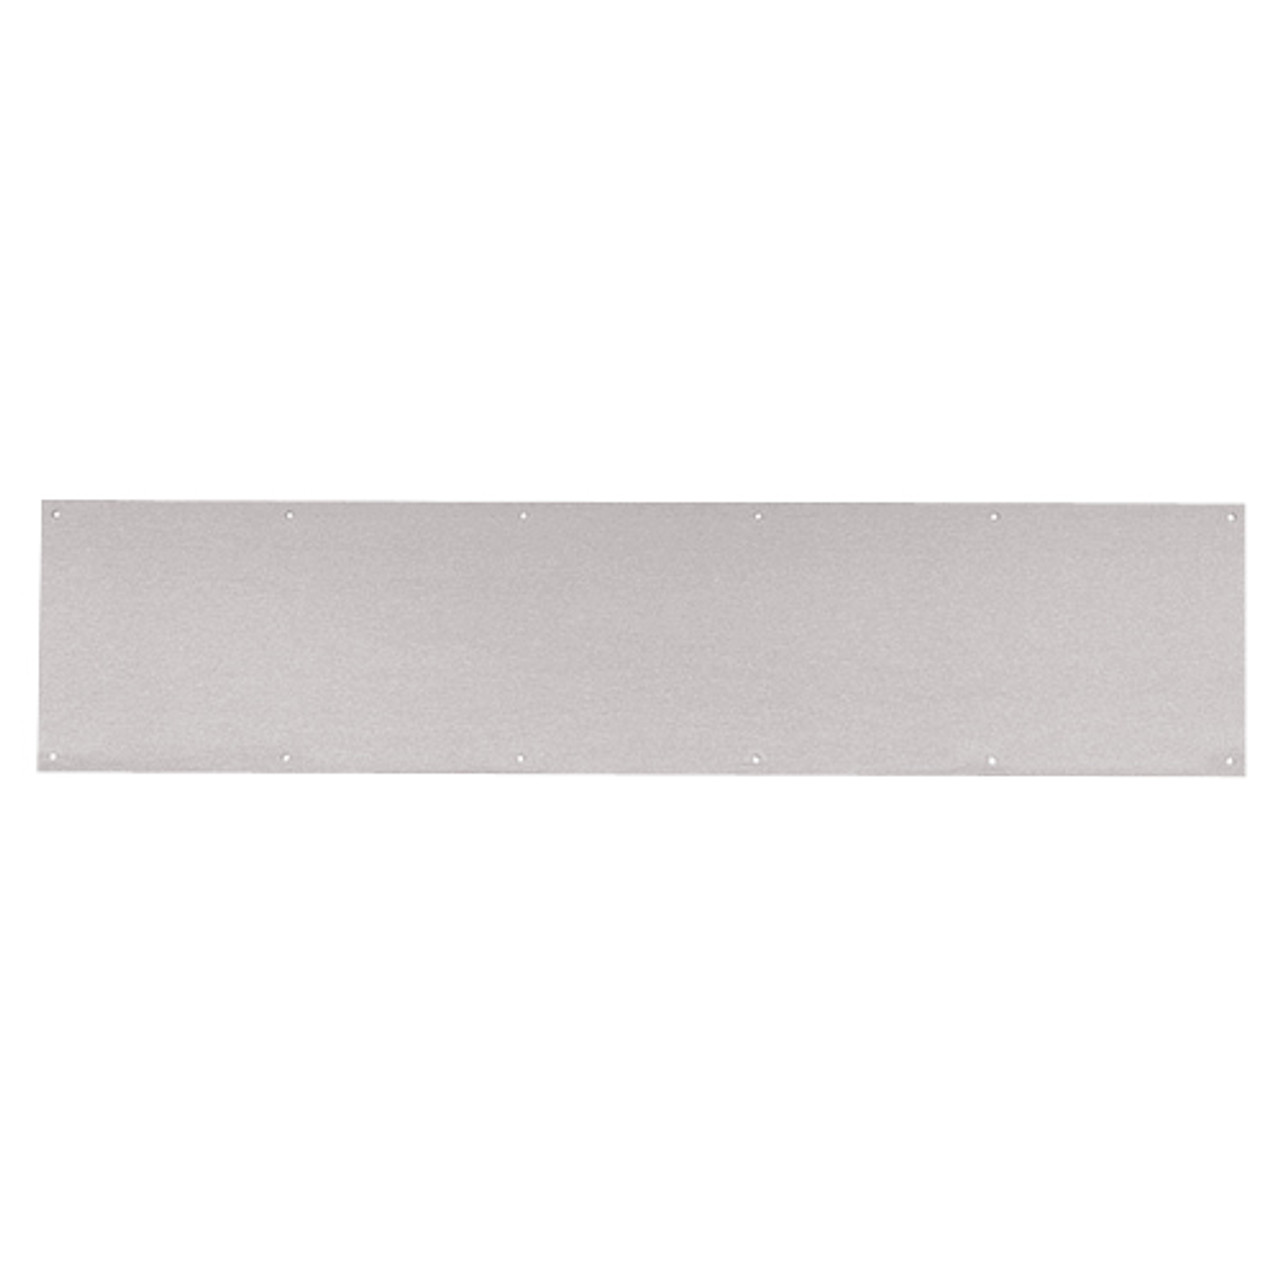 8400-US32D-3x44-B-CS Ives 8400 Series Protection Plate in Satin Stainless Steel